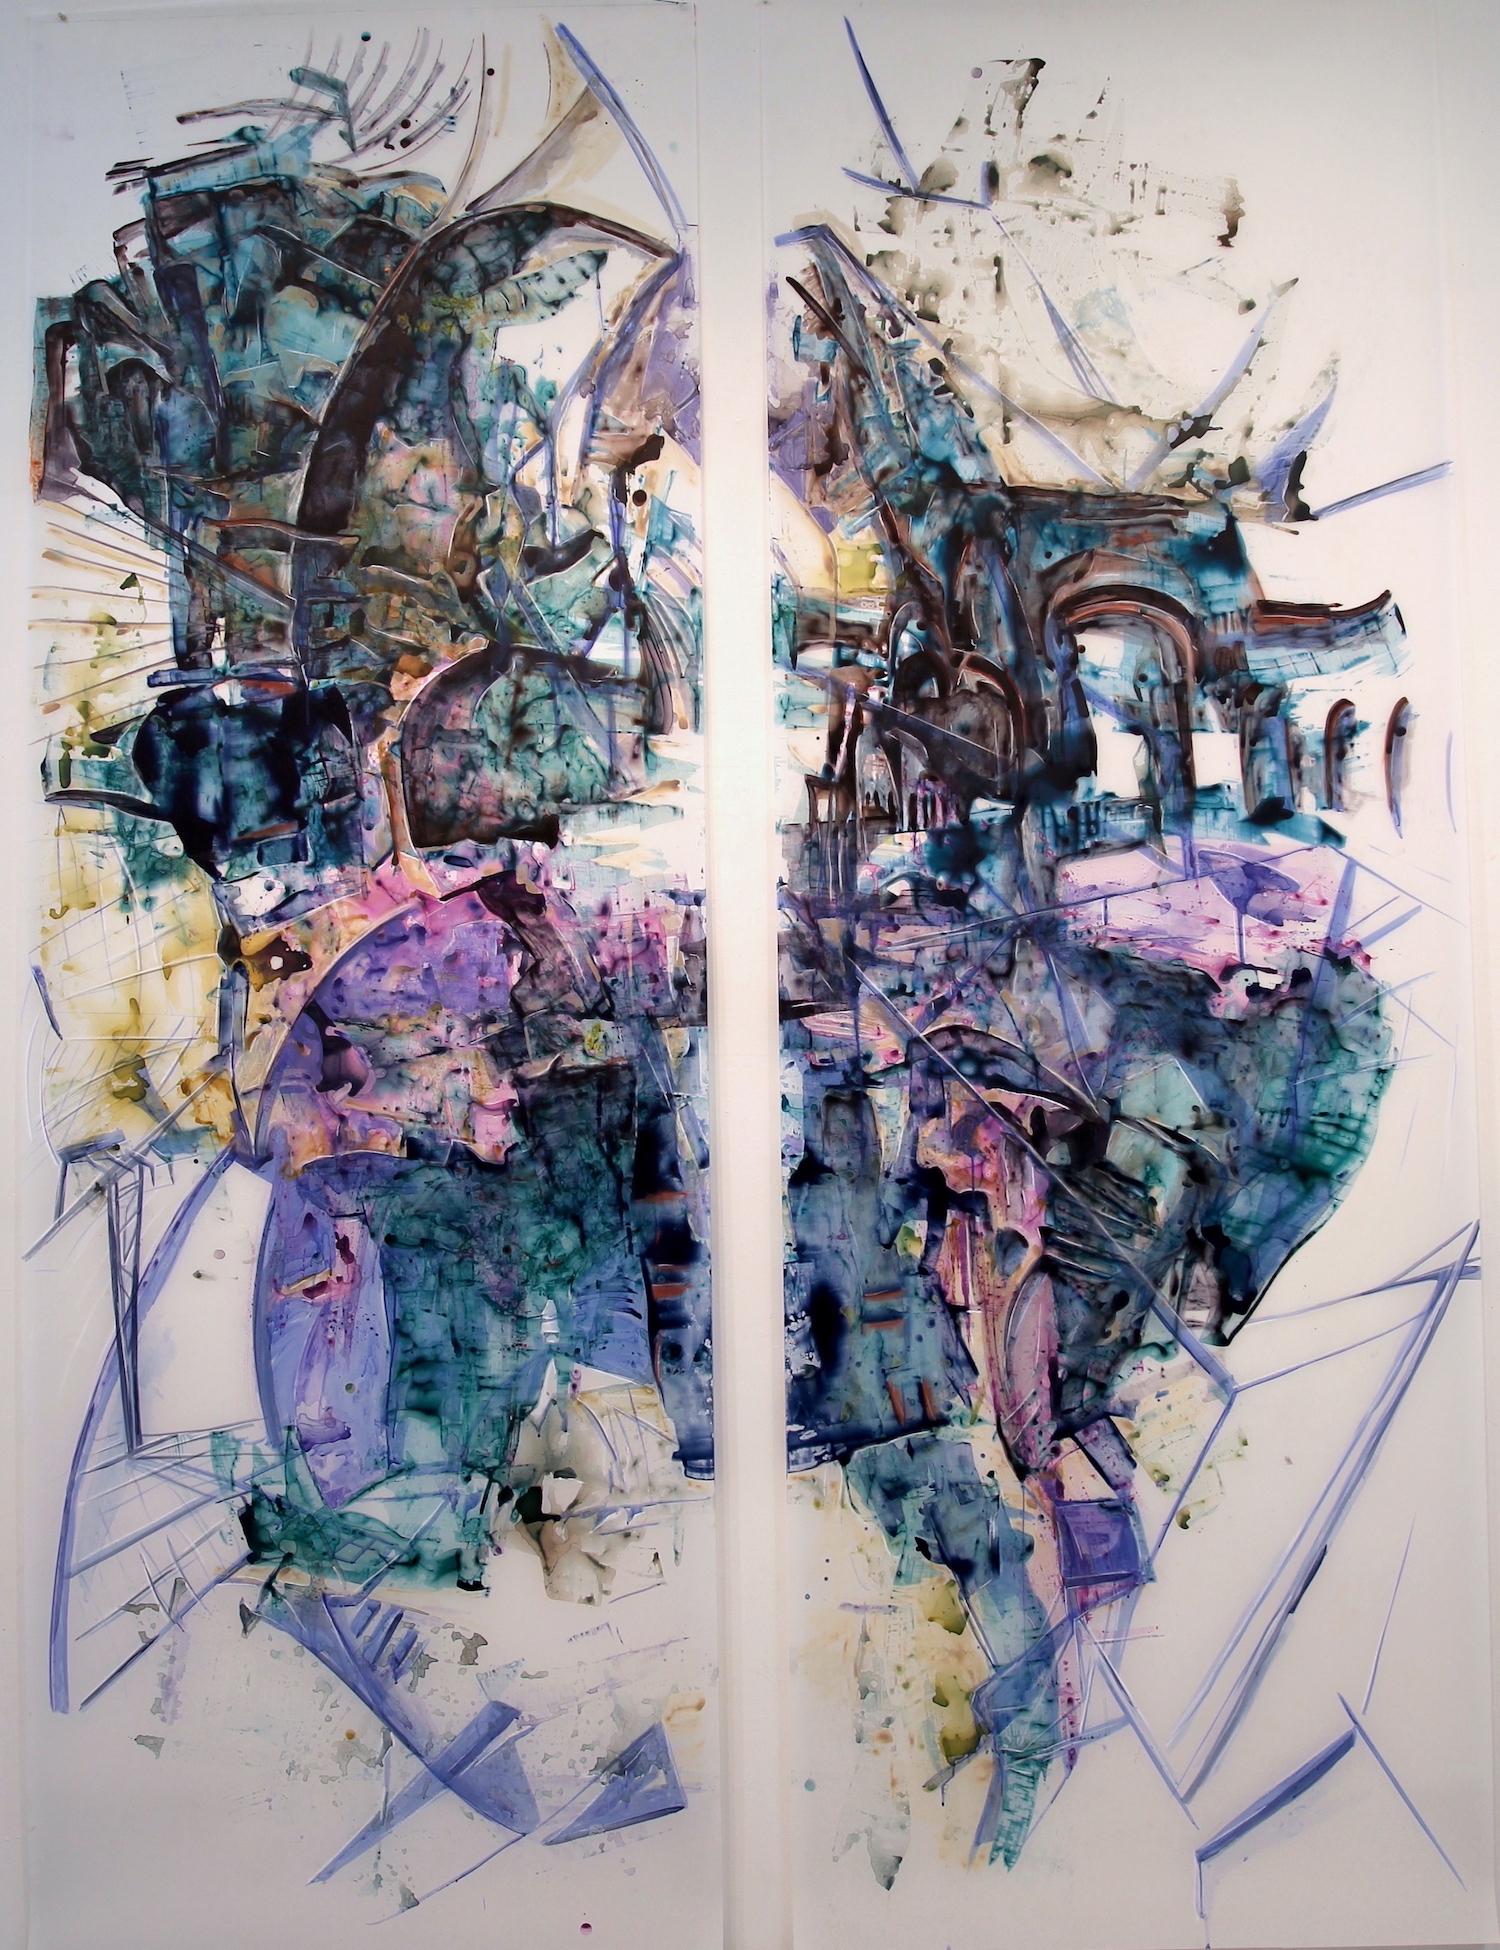 Zahra Nazari Abstract Painting - "Dream Palace" weaves architectural, linear and organic forms in violet and blue